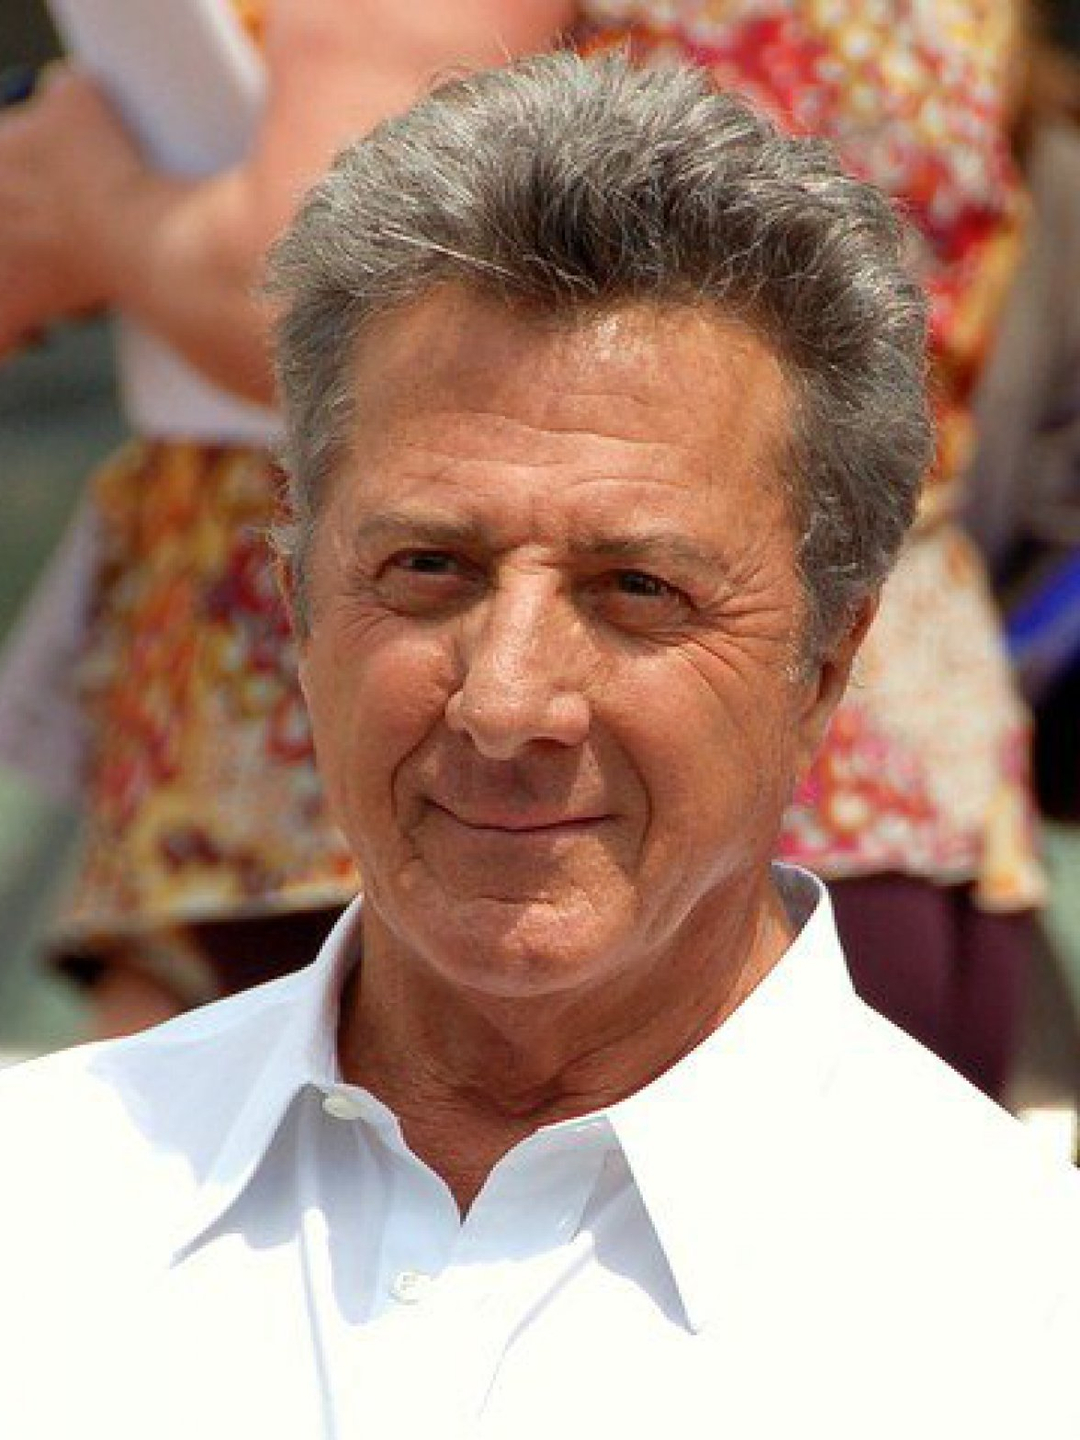 Dustin Hoffman who are his parents